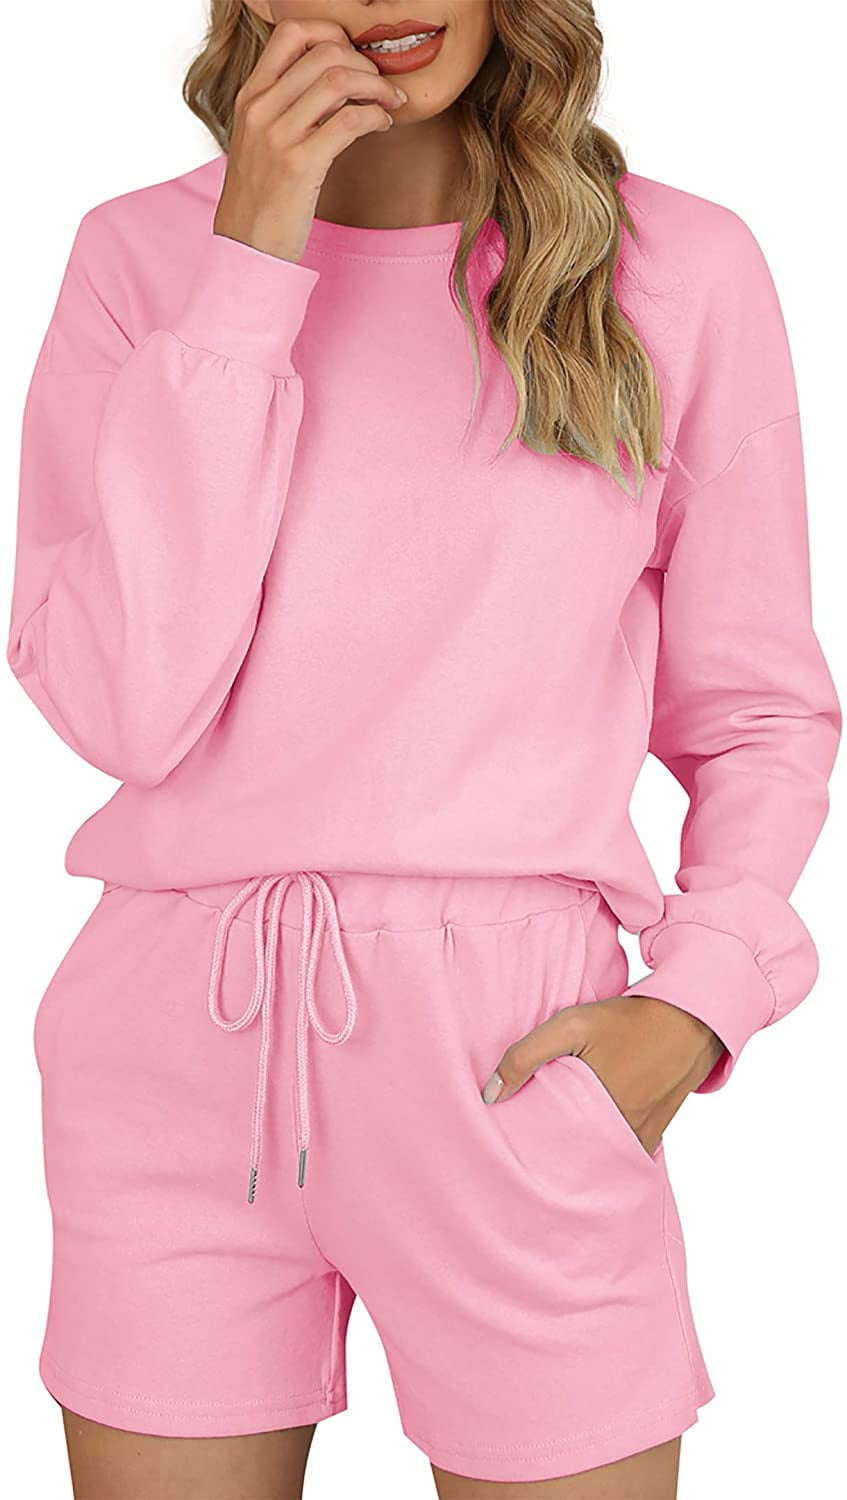 Women's Long Sleeve Pajamas With Shorts : Fashion Brands Group ...